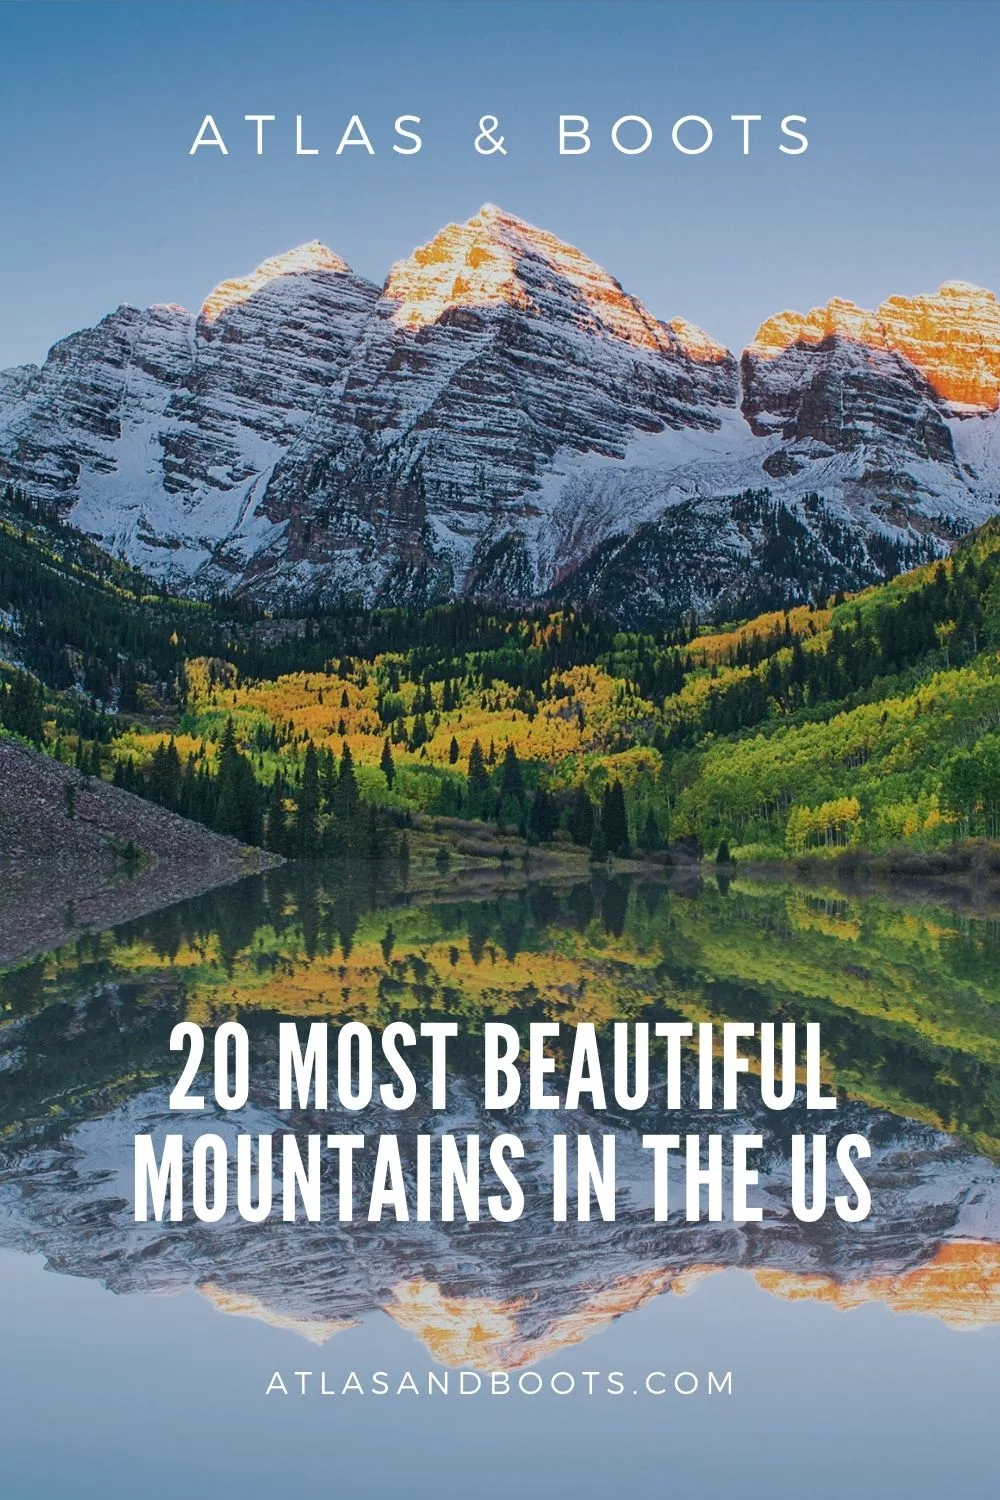 13 Scenic Mountain Ranges in the U.S. You Can Easily Visit This Summer